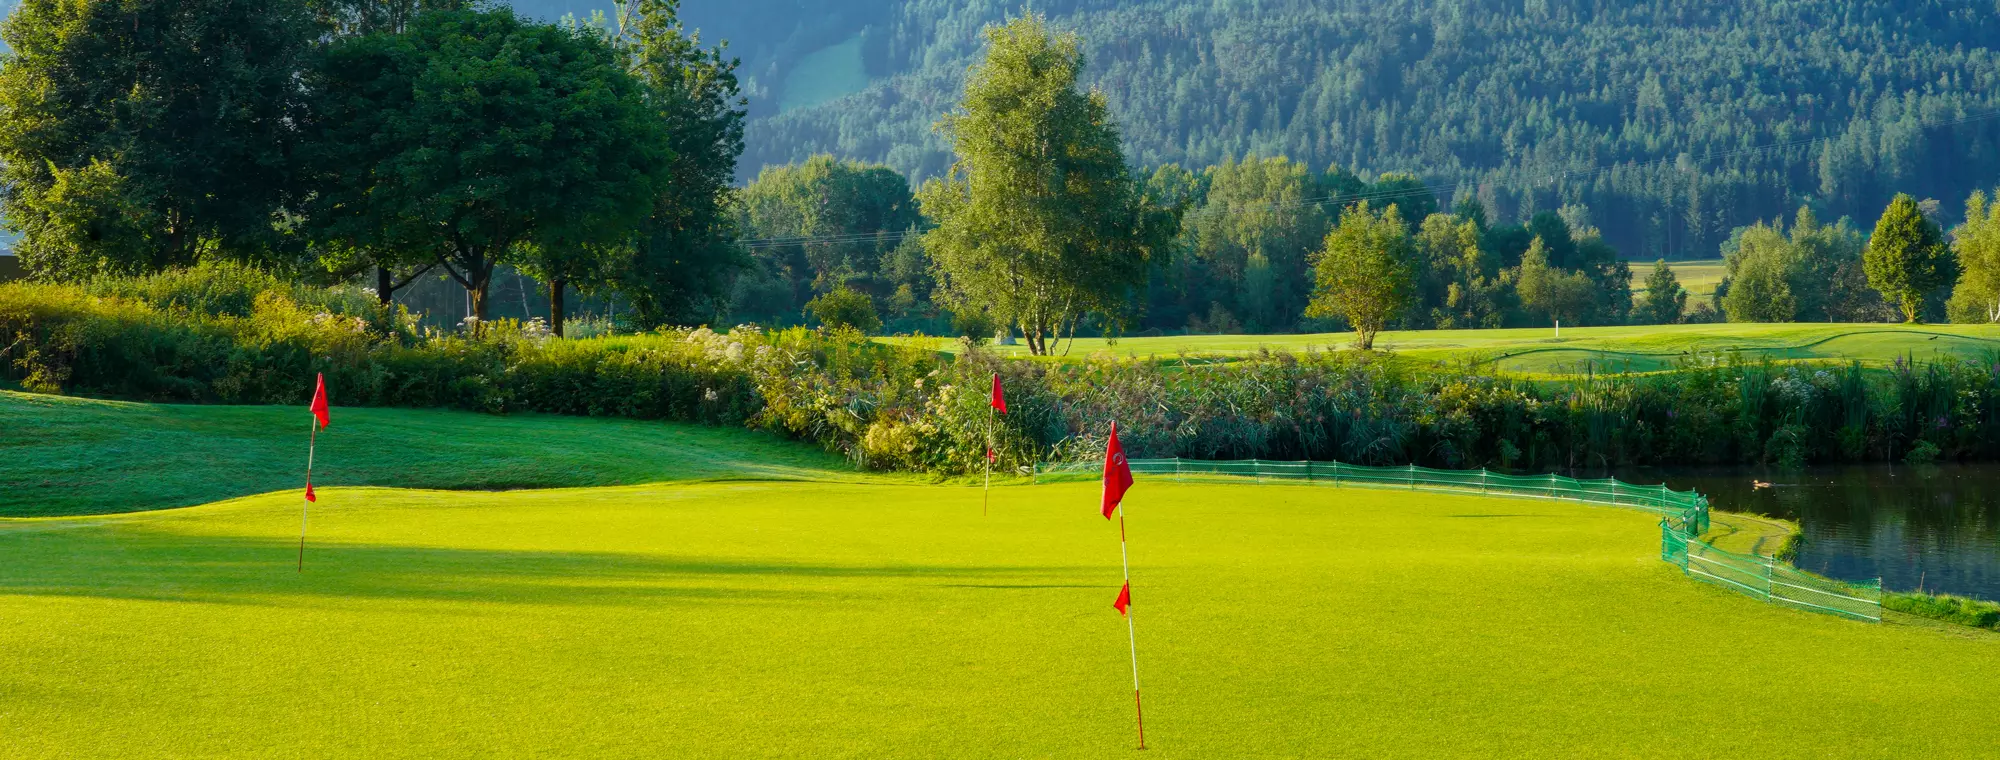 Golf, Riscone, Bruneck, South Tyrol, Holiday